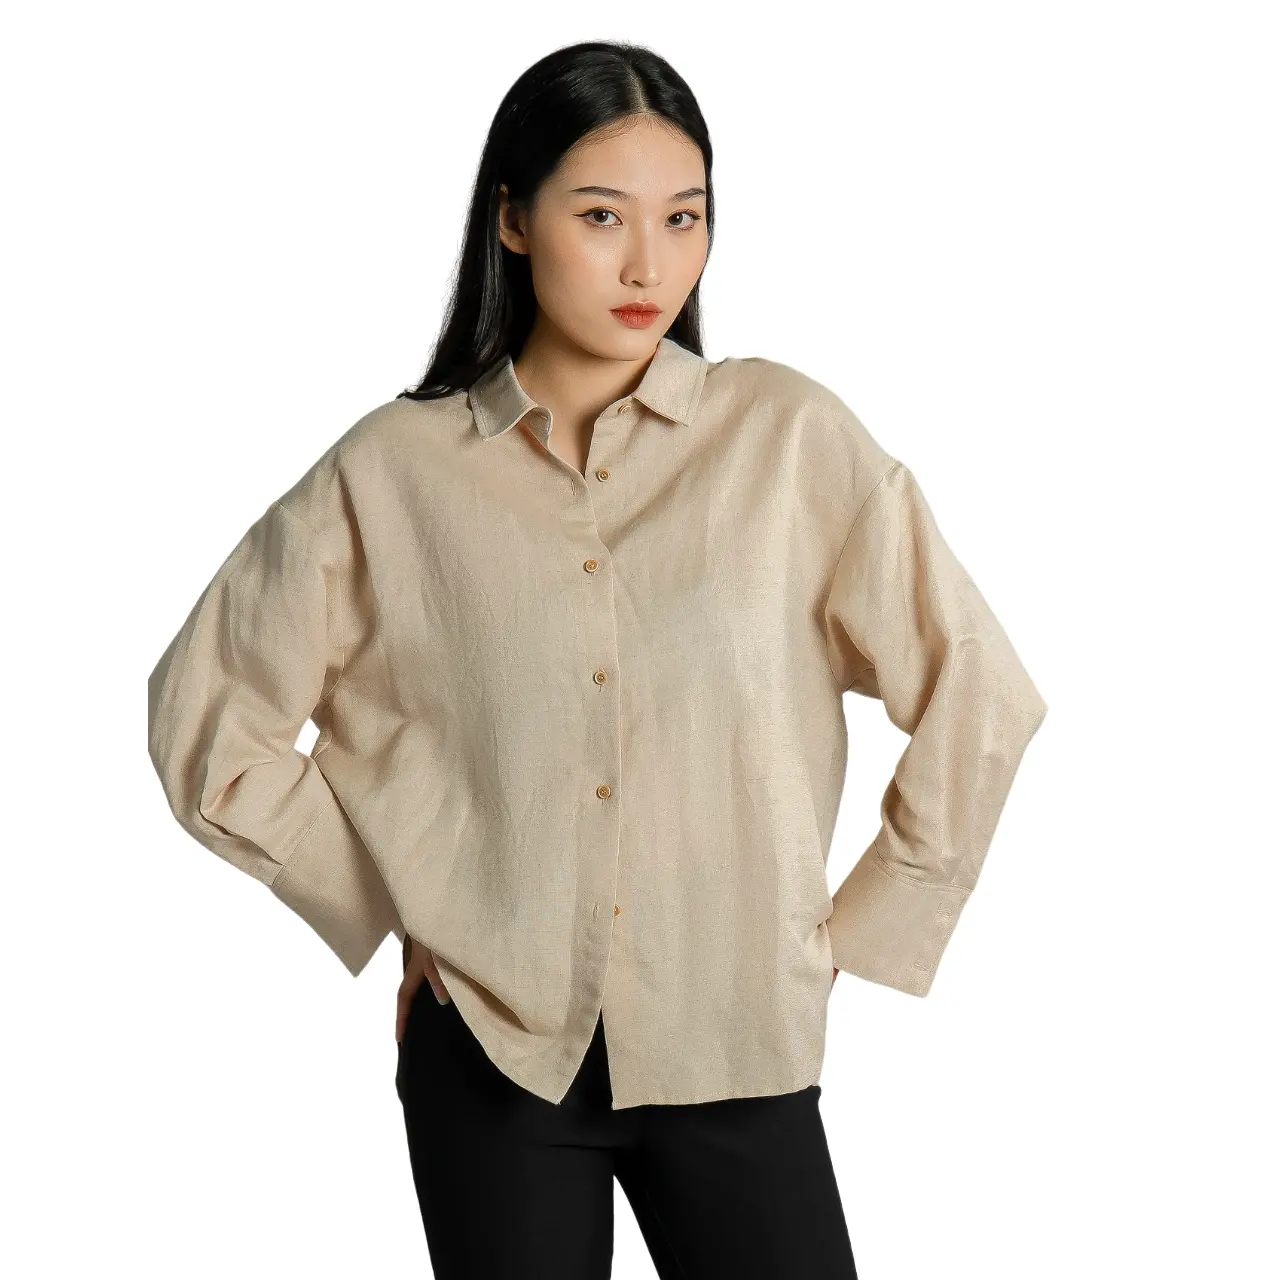 NEWEST DESIGN FROM NAM&CO BRAND - TOP QUALITY OVERSIZED LOOSE BOY FRIEND LONG SLEEVE SHIRT FOR SALE